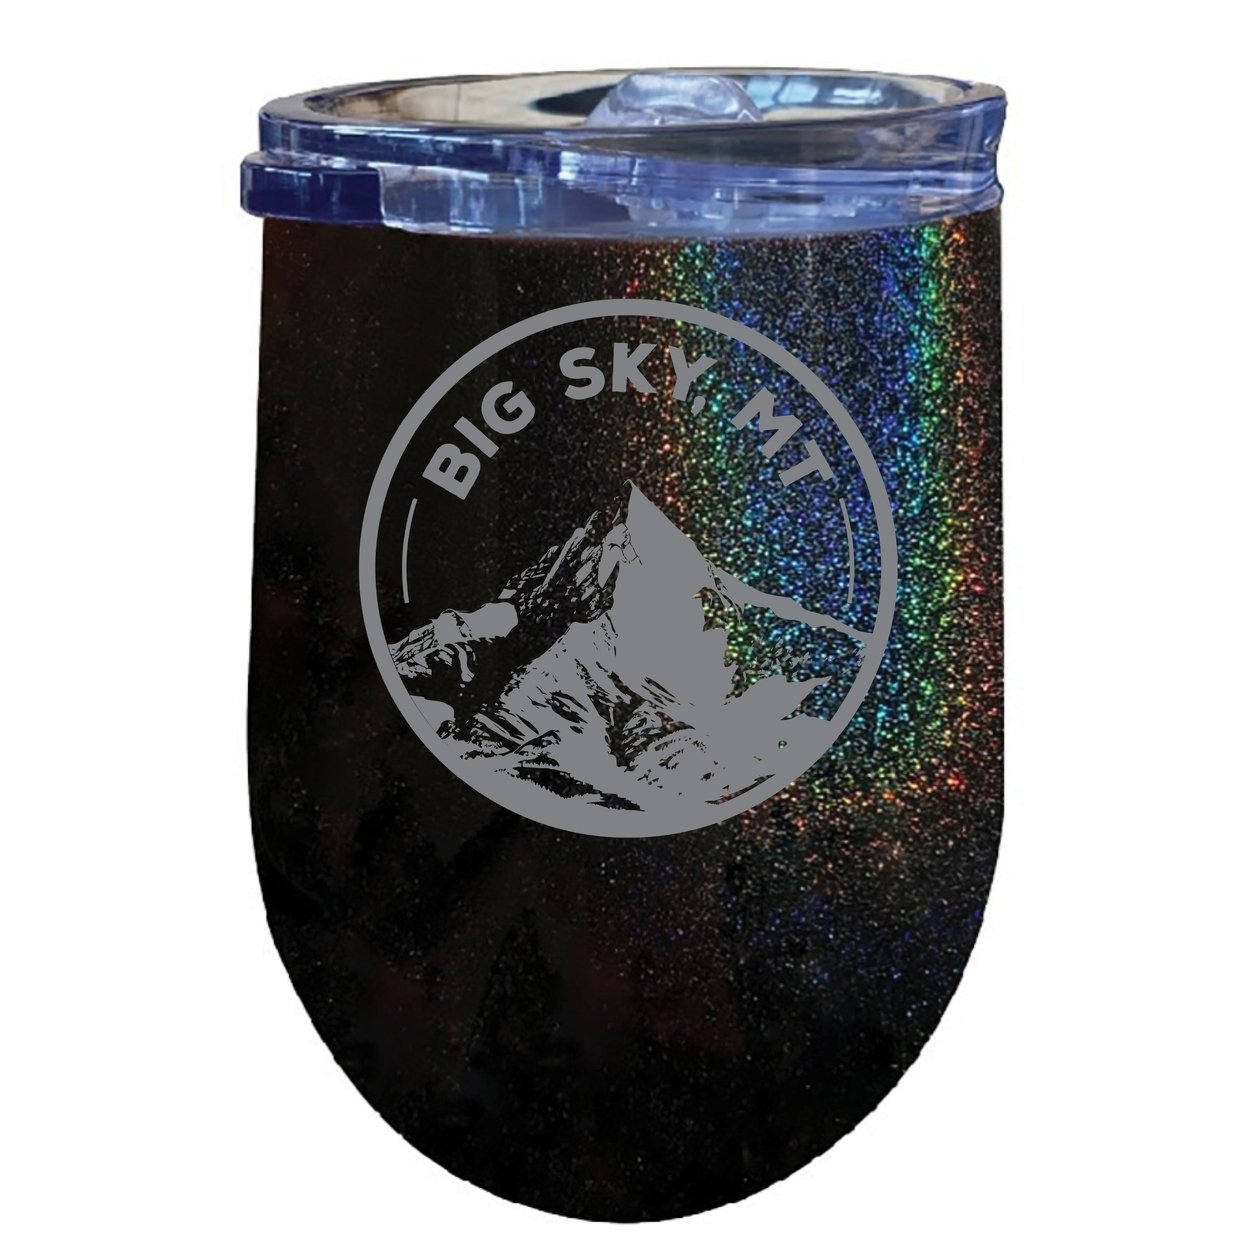 Big Sky Montana Souvenir 12 Oz Engraved Insulated Wine Stainless Steel Tumbler - Black,,2-Pack